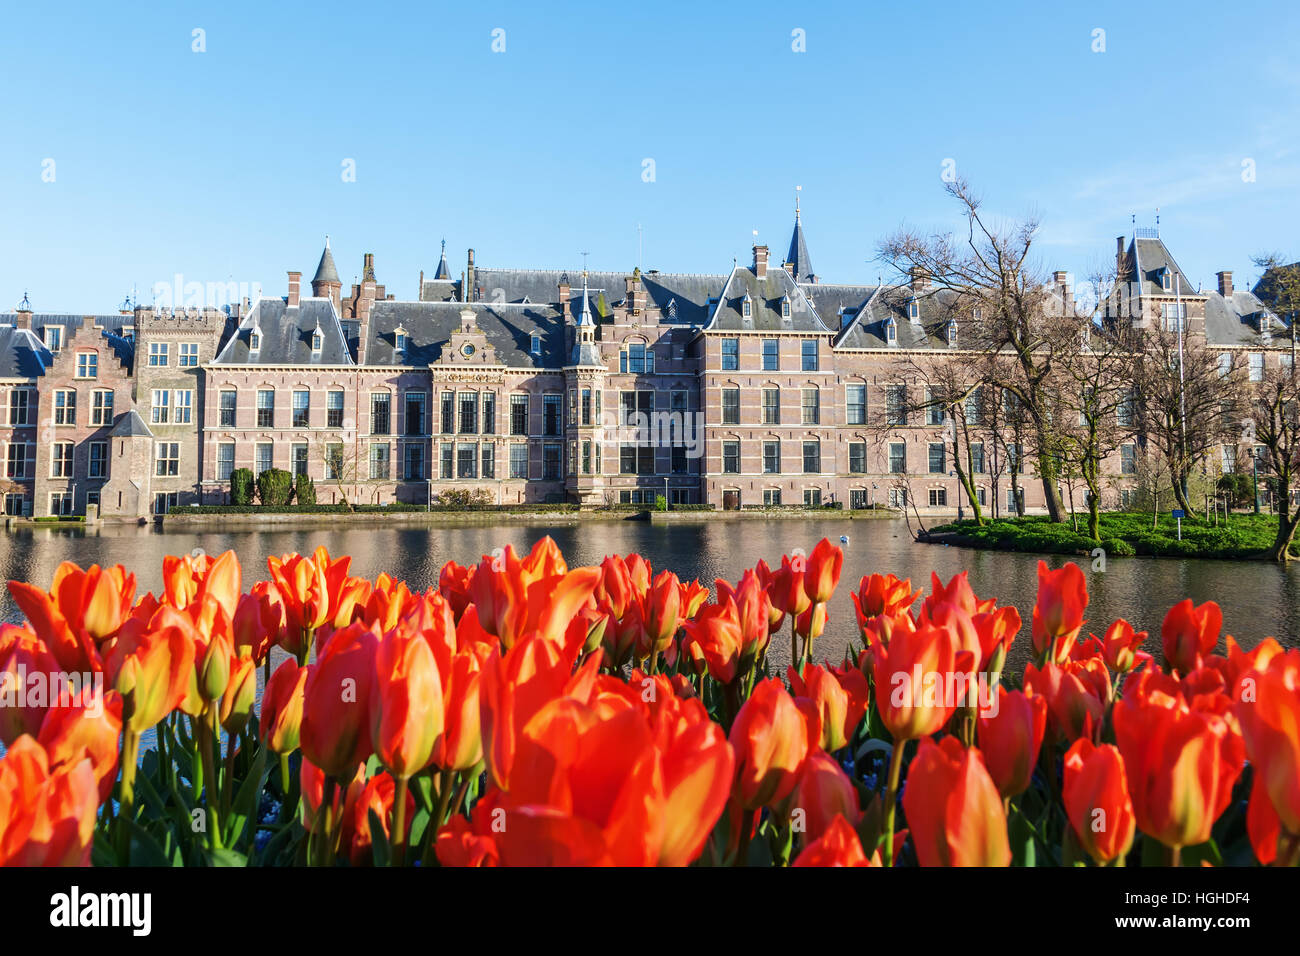 Binnenhof, the seat of the Dutch parliament, in The Hague, Netherlands Stock Photo